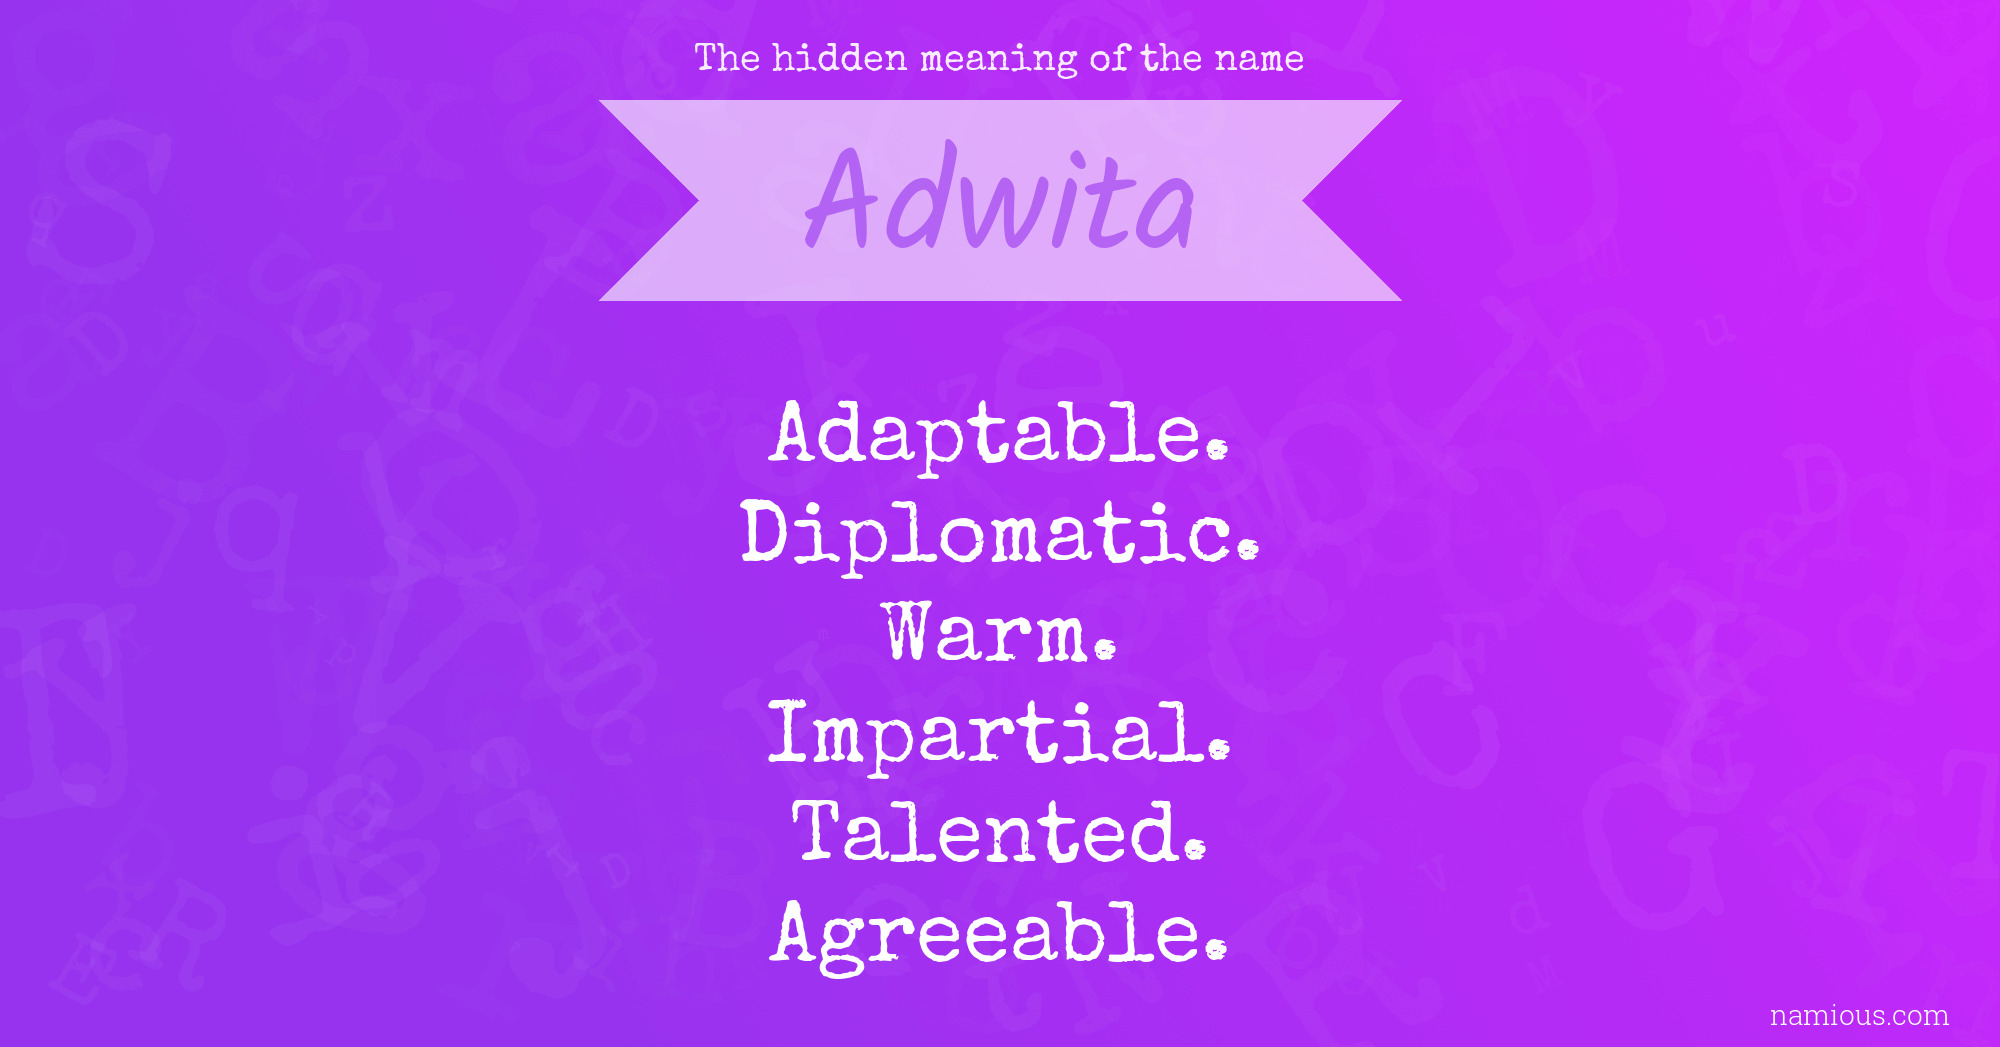 The hidden meaning of the name Adwita